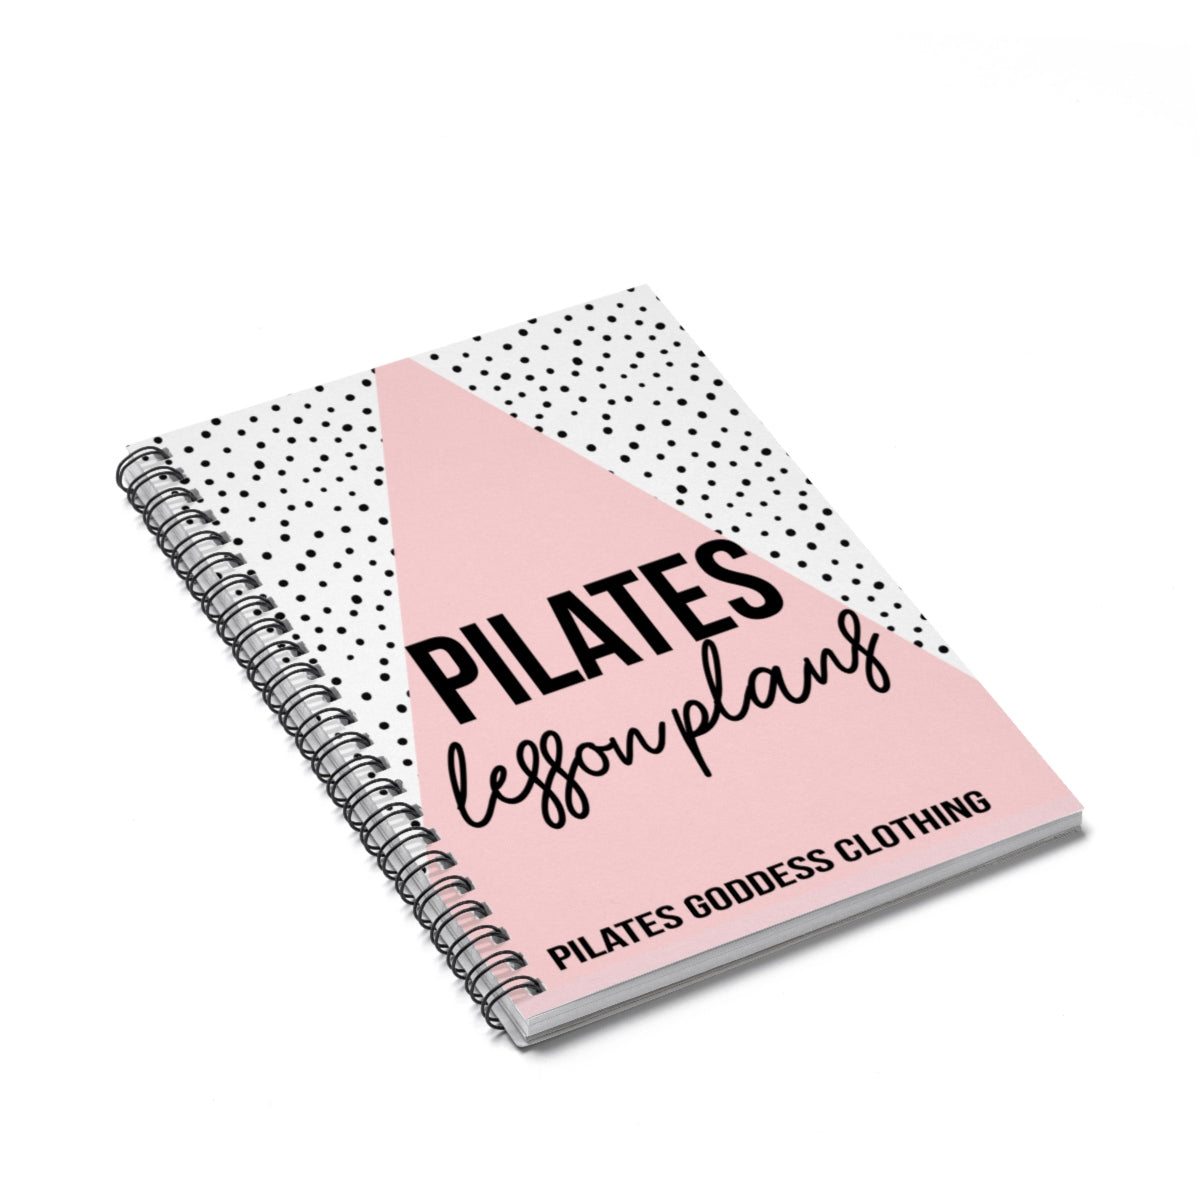 PILATES QUOTE FLEXIBLE SPINE: Lined Journal, Diary, Notebook, 6x9